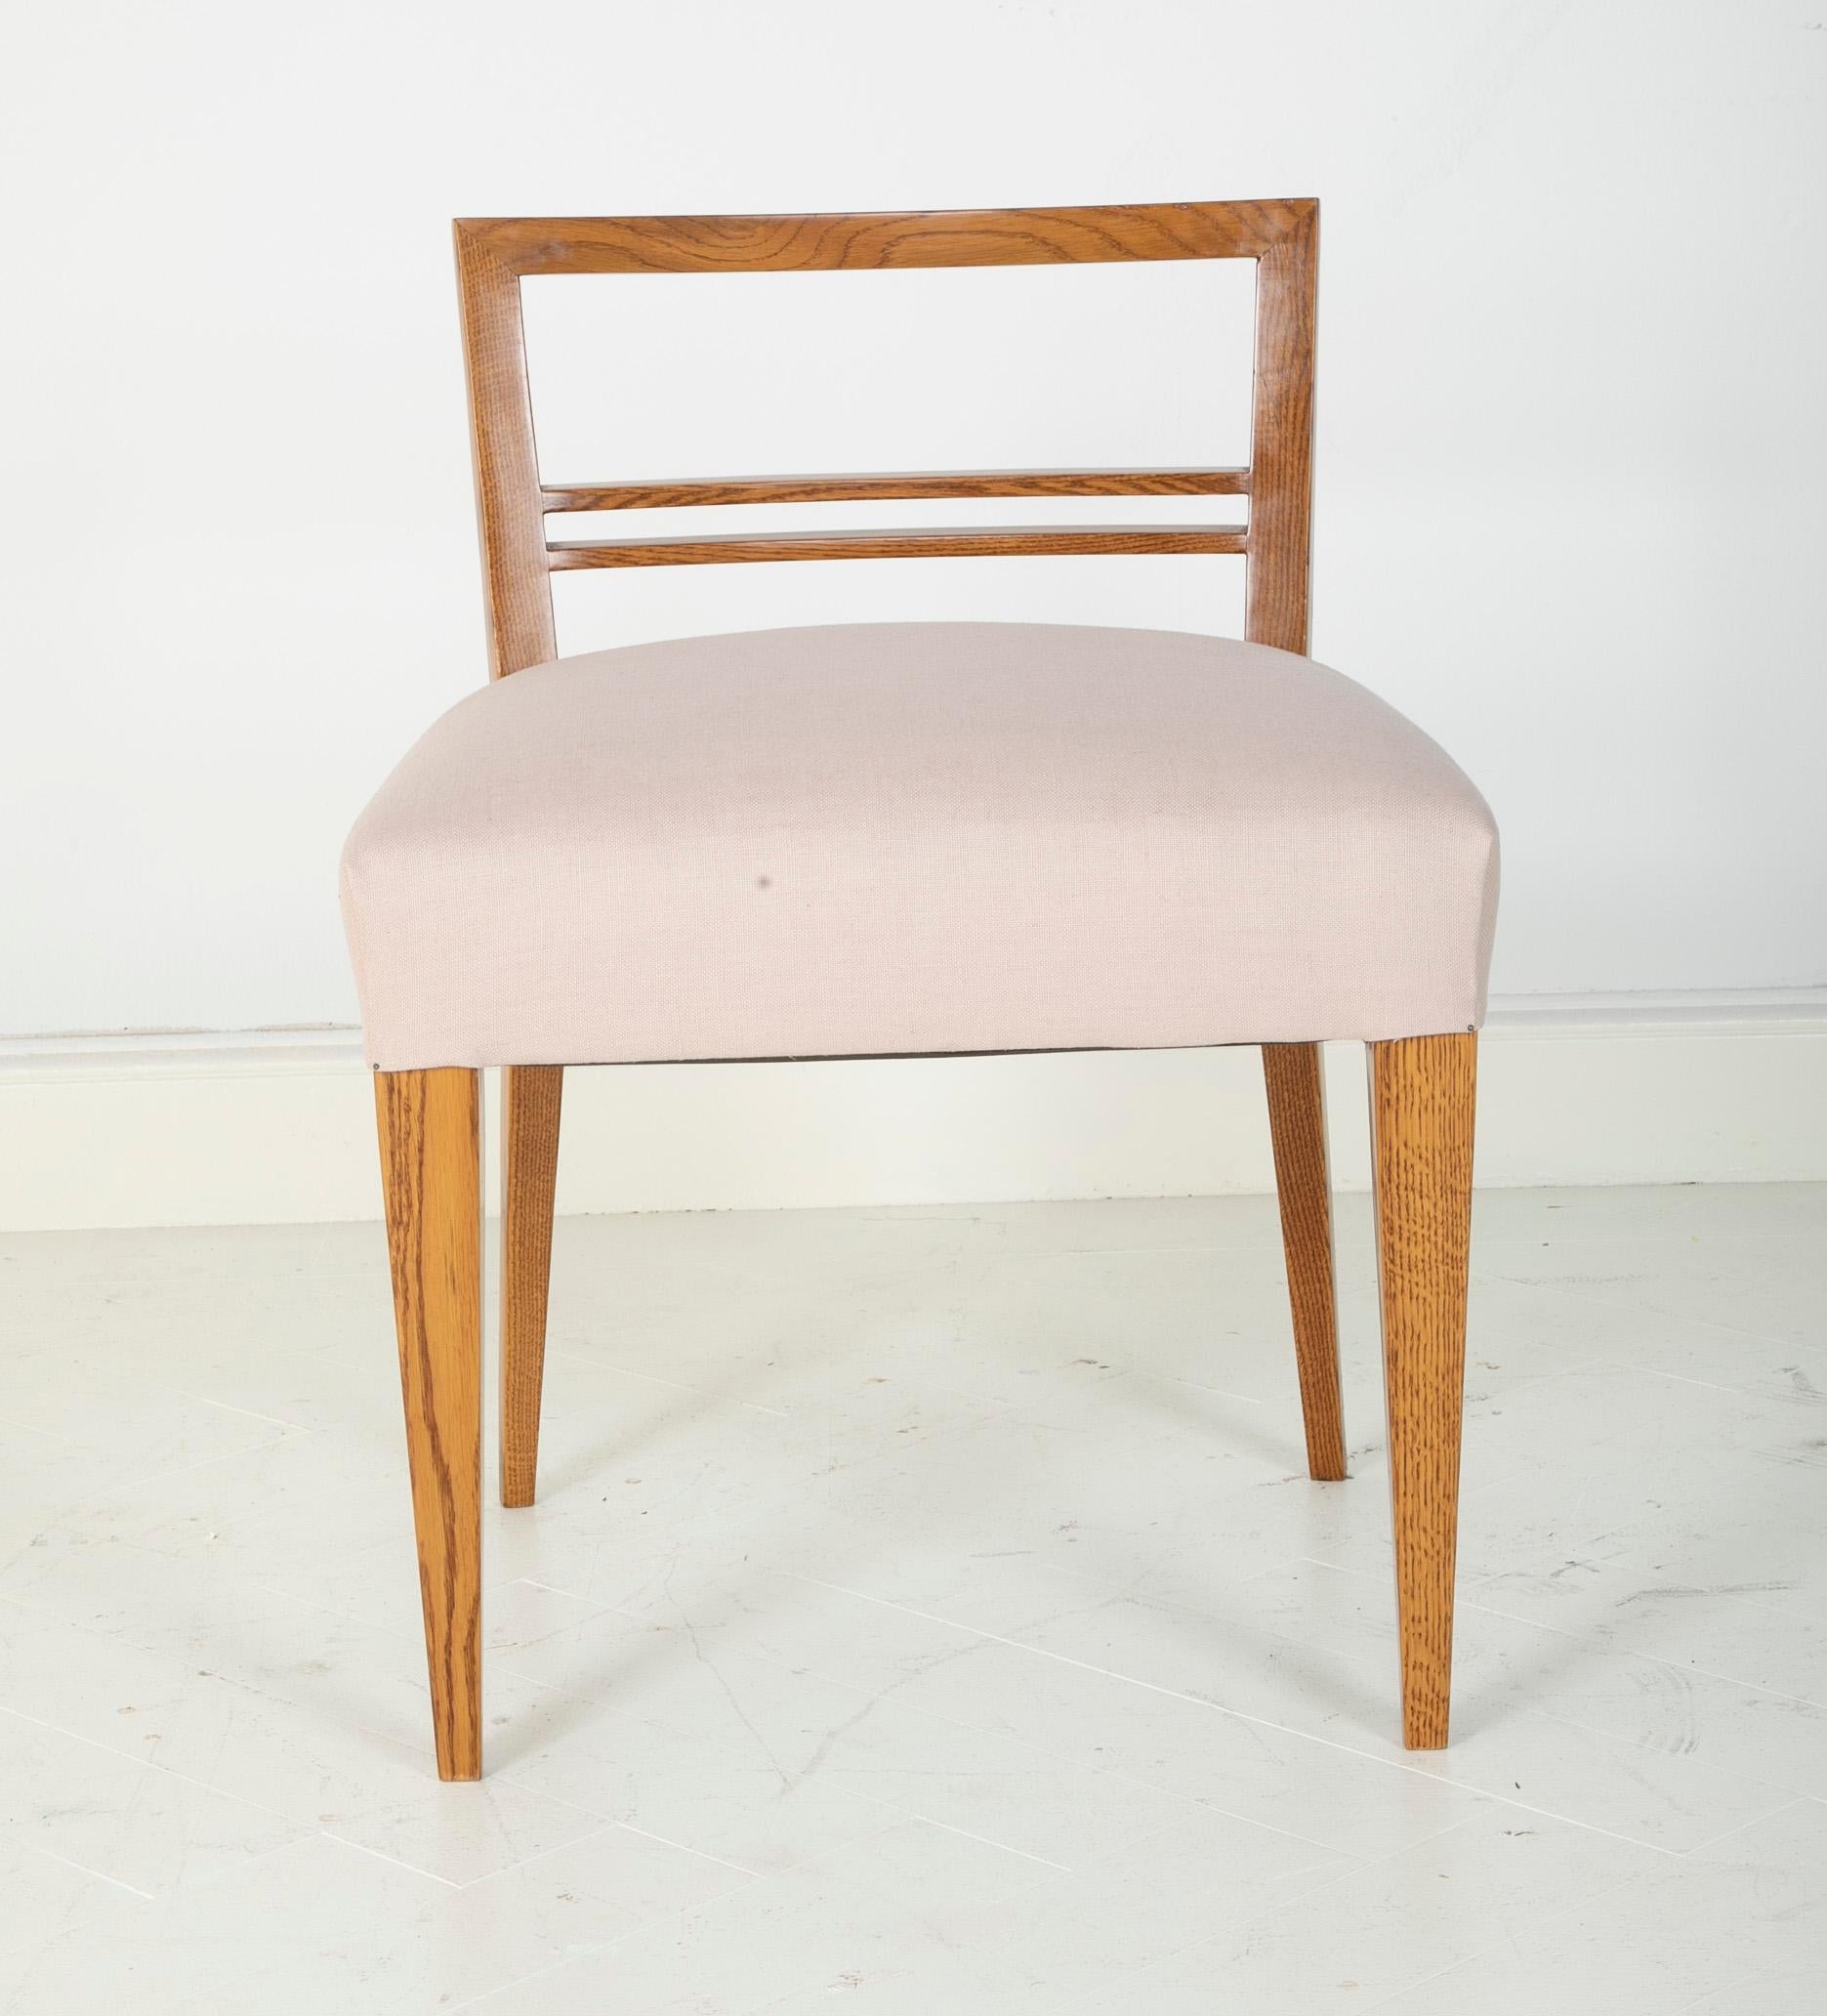 A midcentury French table chair in oak. Sold individually, pair available.